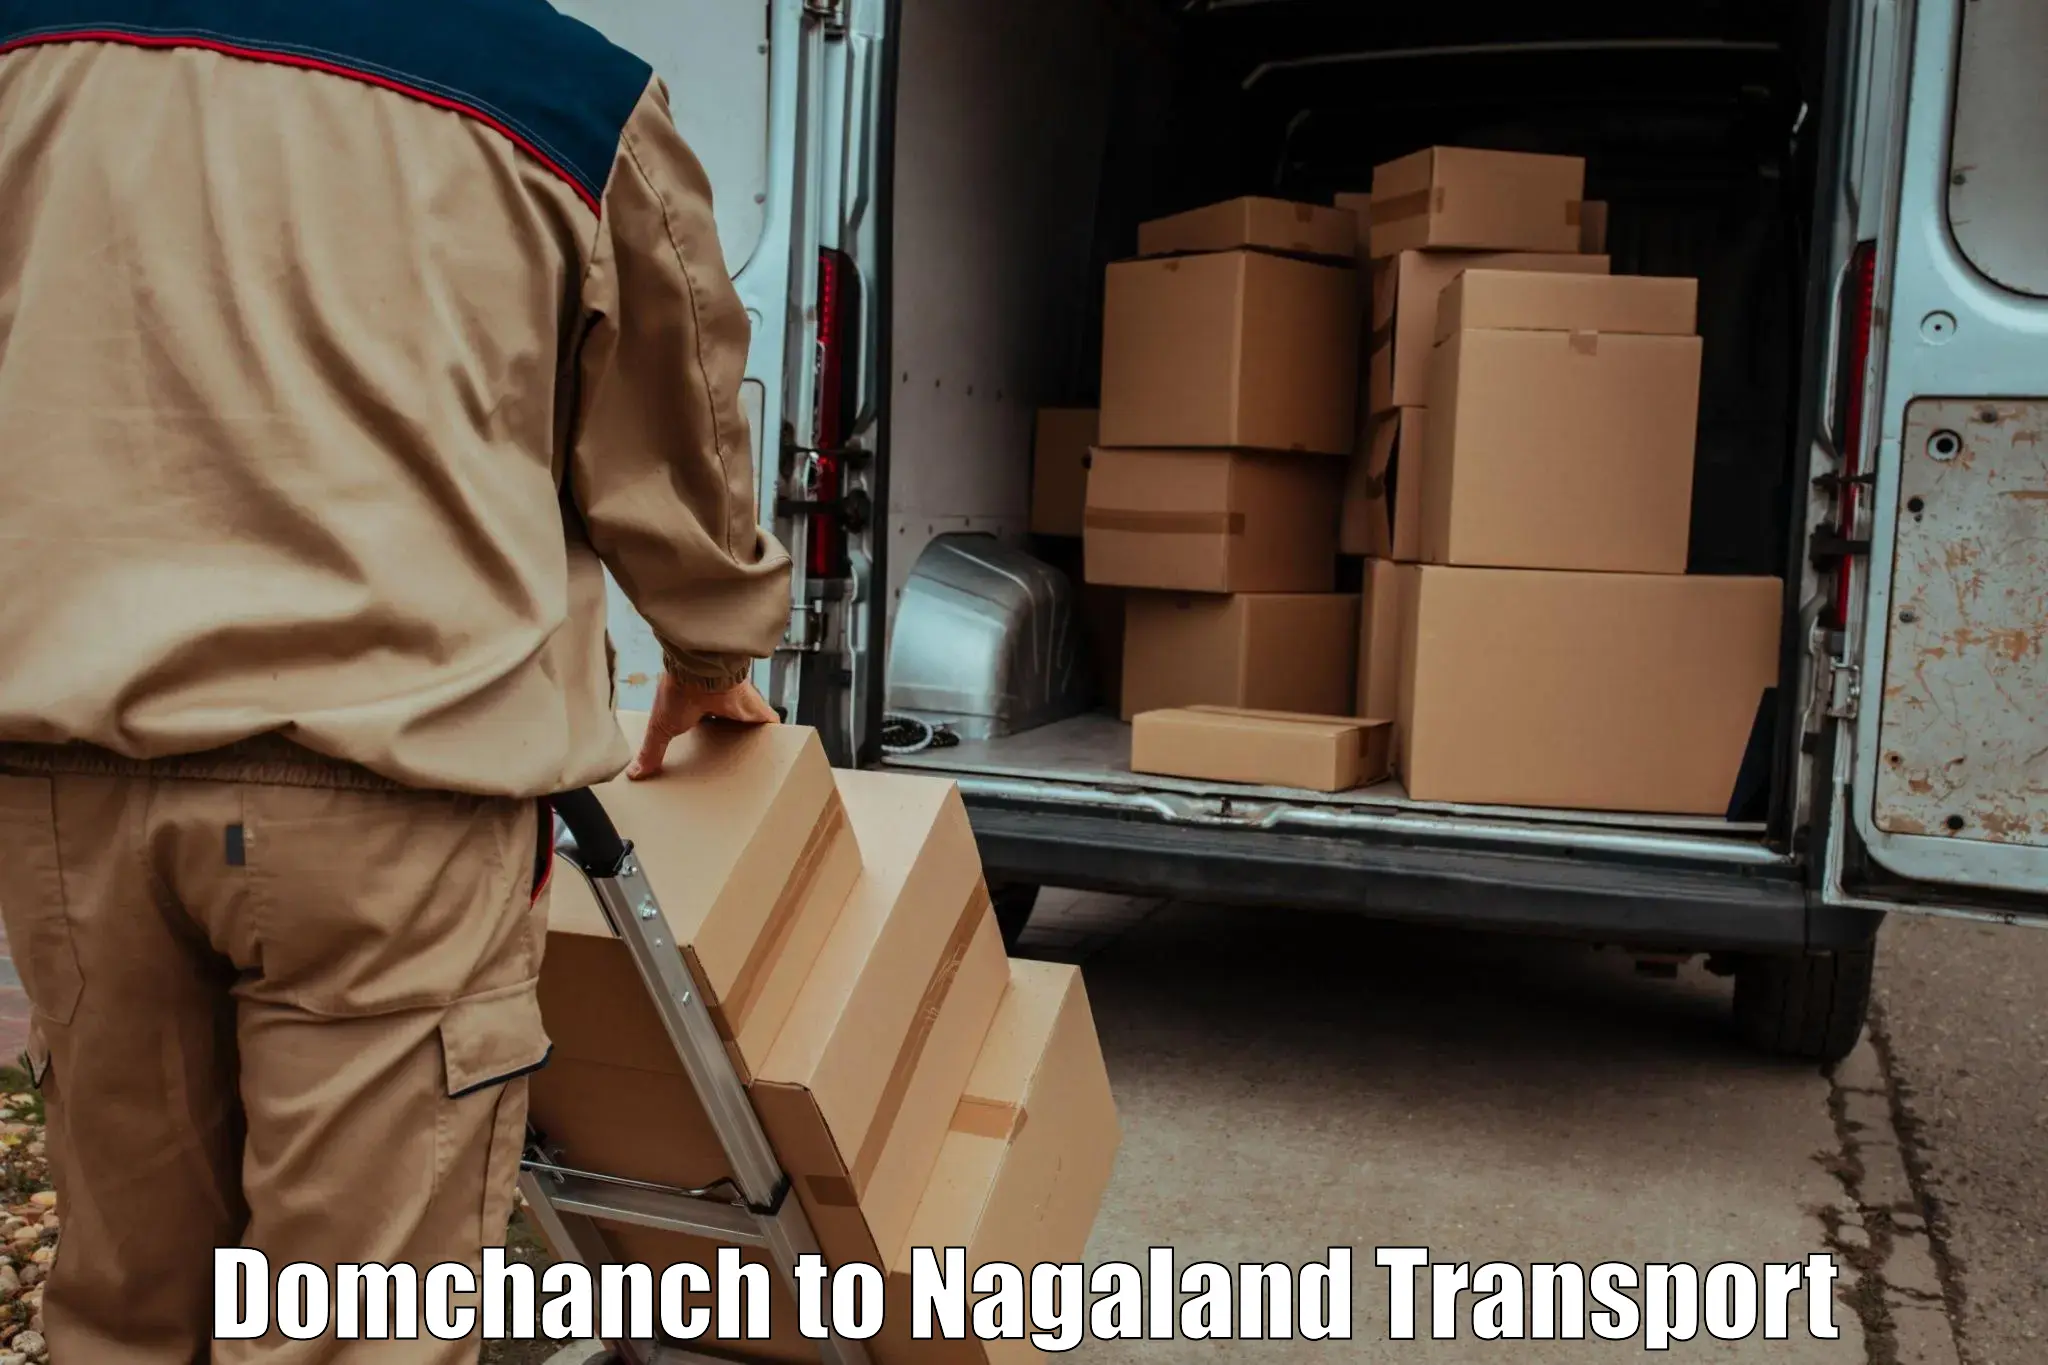 Commercial transport service Domchanch to Nagaland